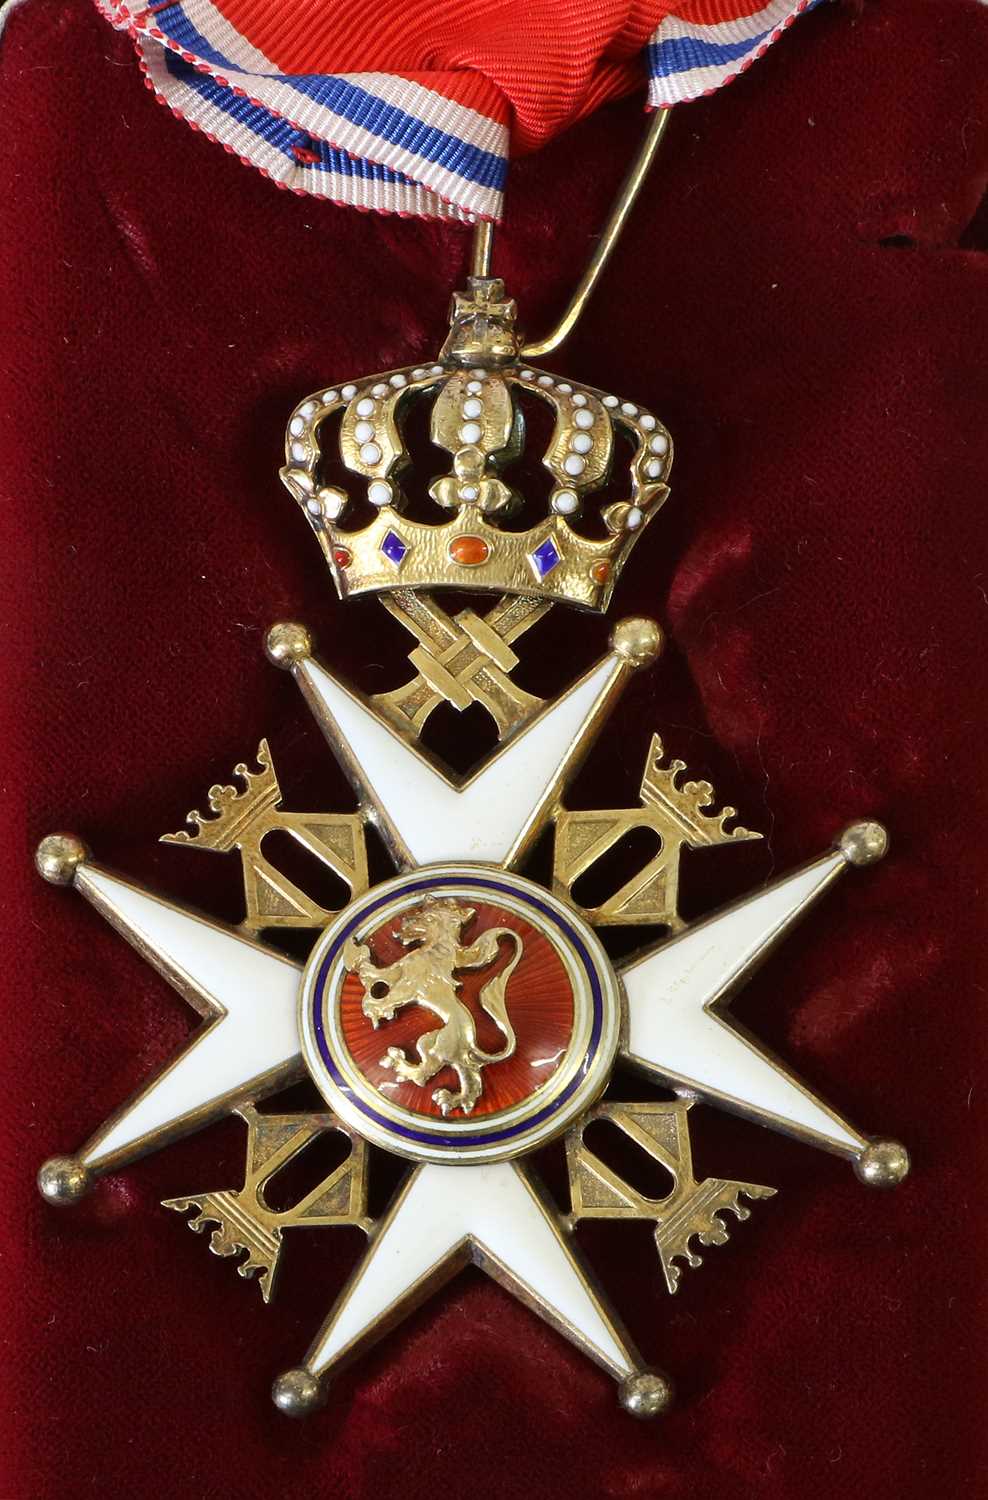 The Kingdom of Norway - Order of St. Olav, Civil Division, Commander's Neck Badge by J Tostrup, - Image 3 of 3